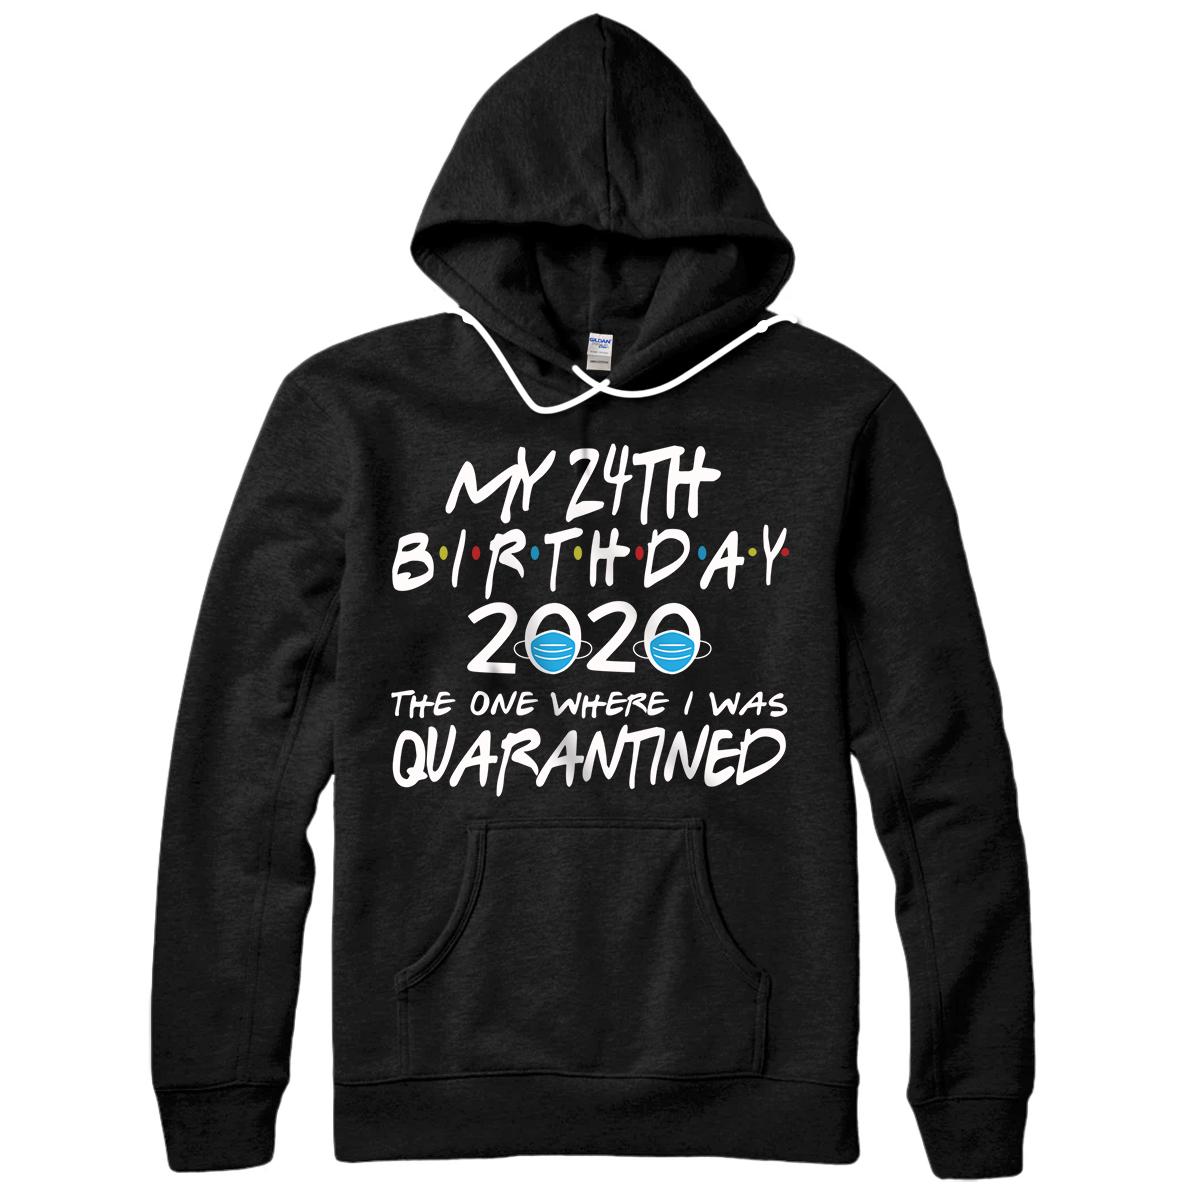 Personalized Birthday Social Distancing, My 24th Birthday Quarantine Gift Pullover Hoodie